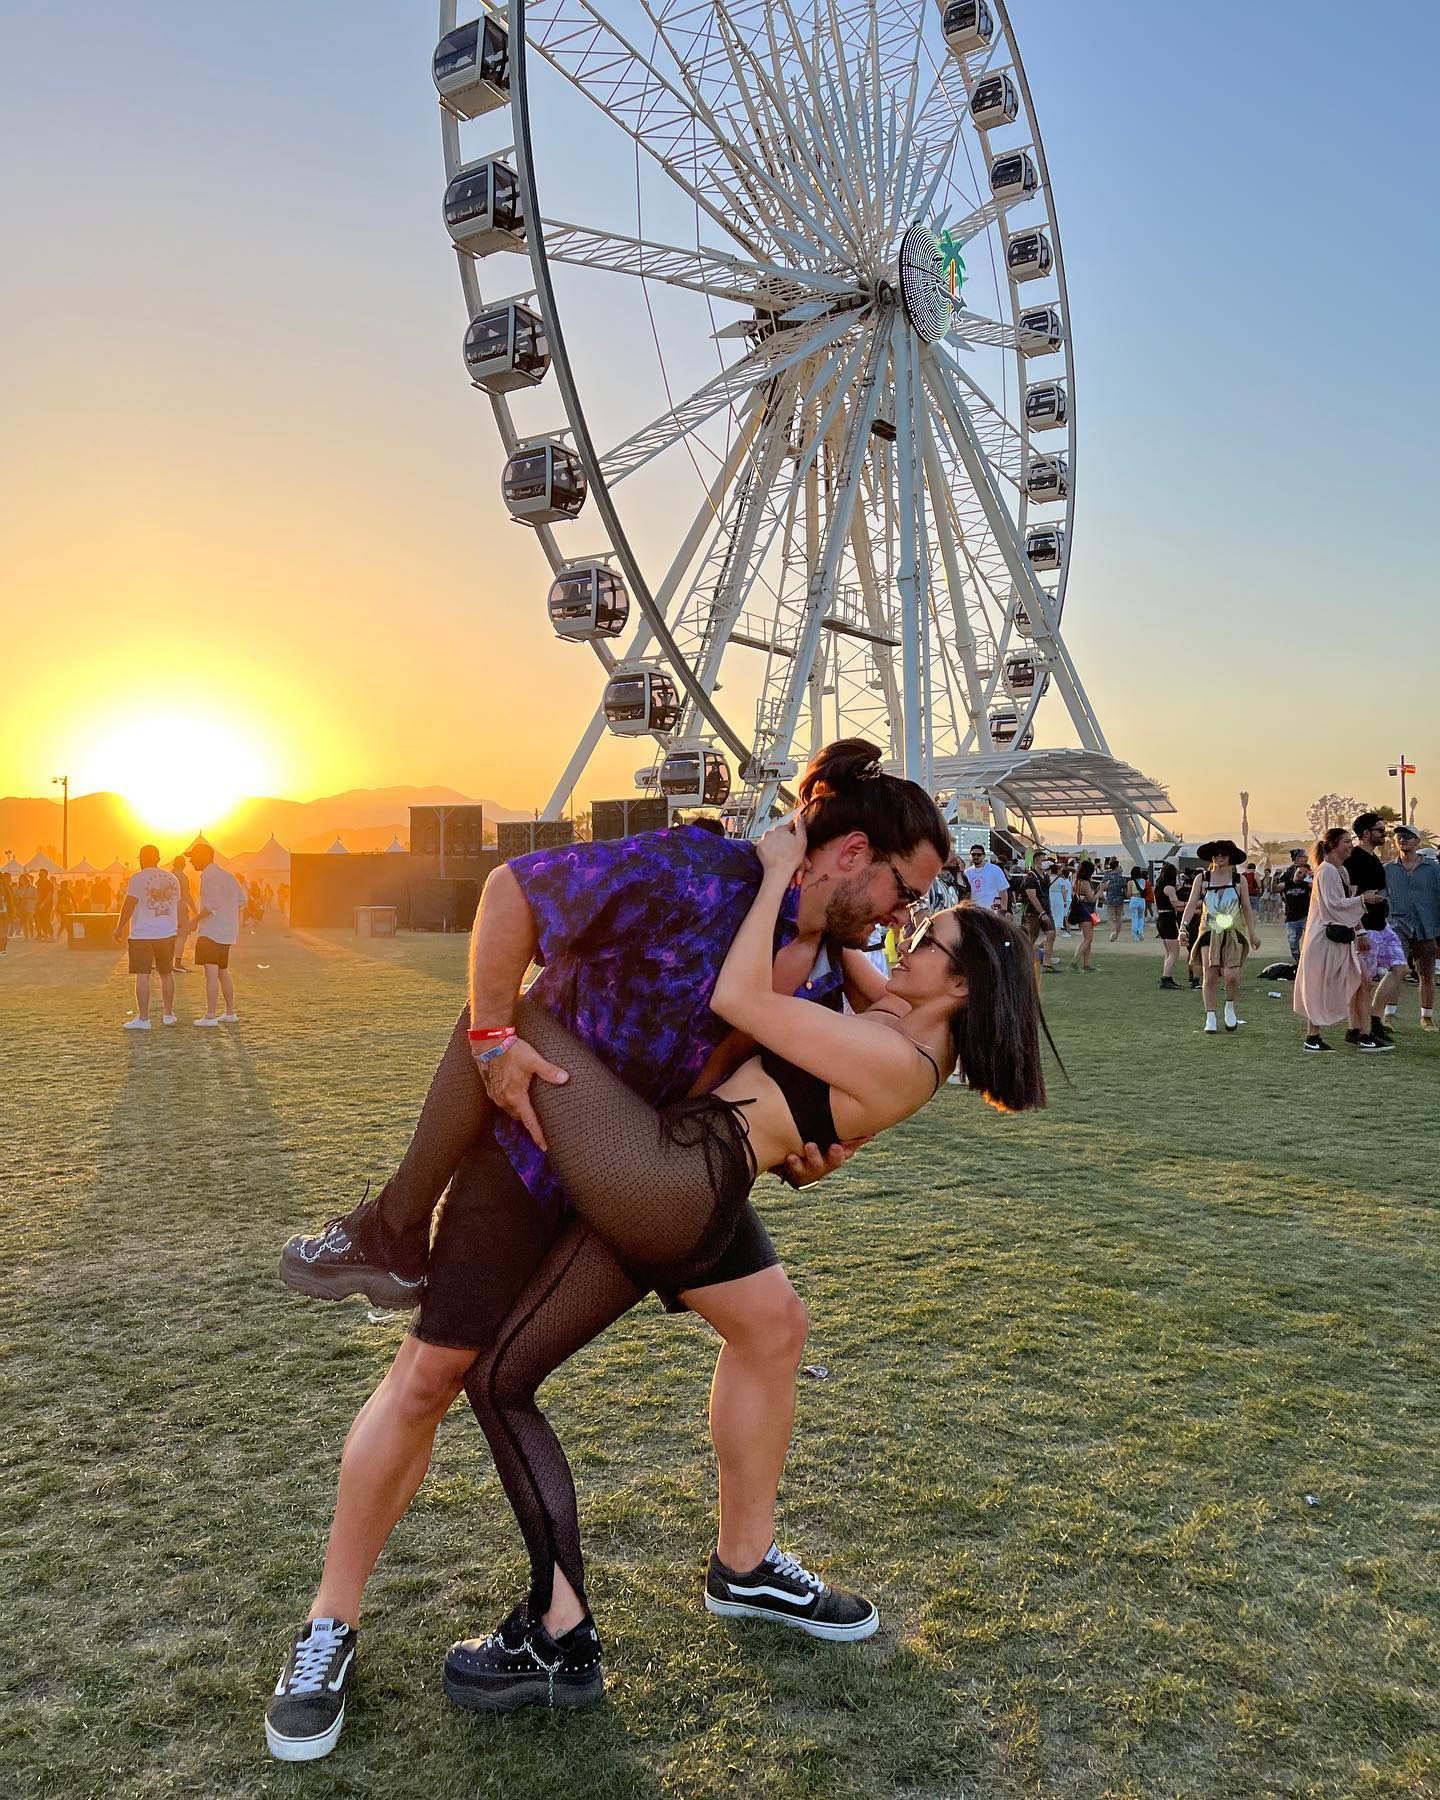 A man kissing a woman in front of a ferris wheel